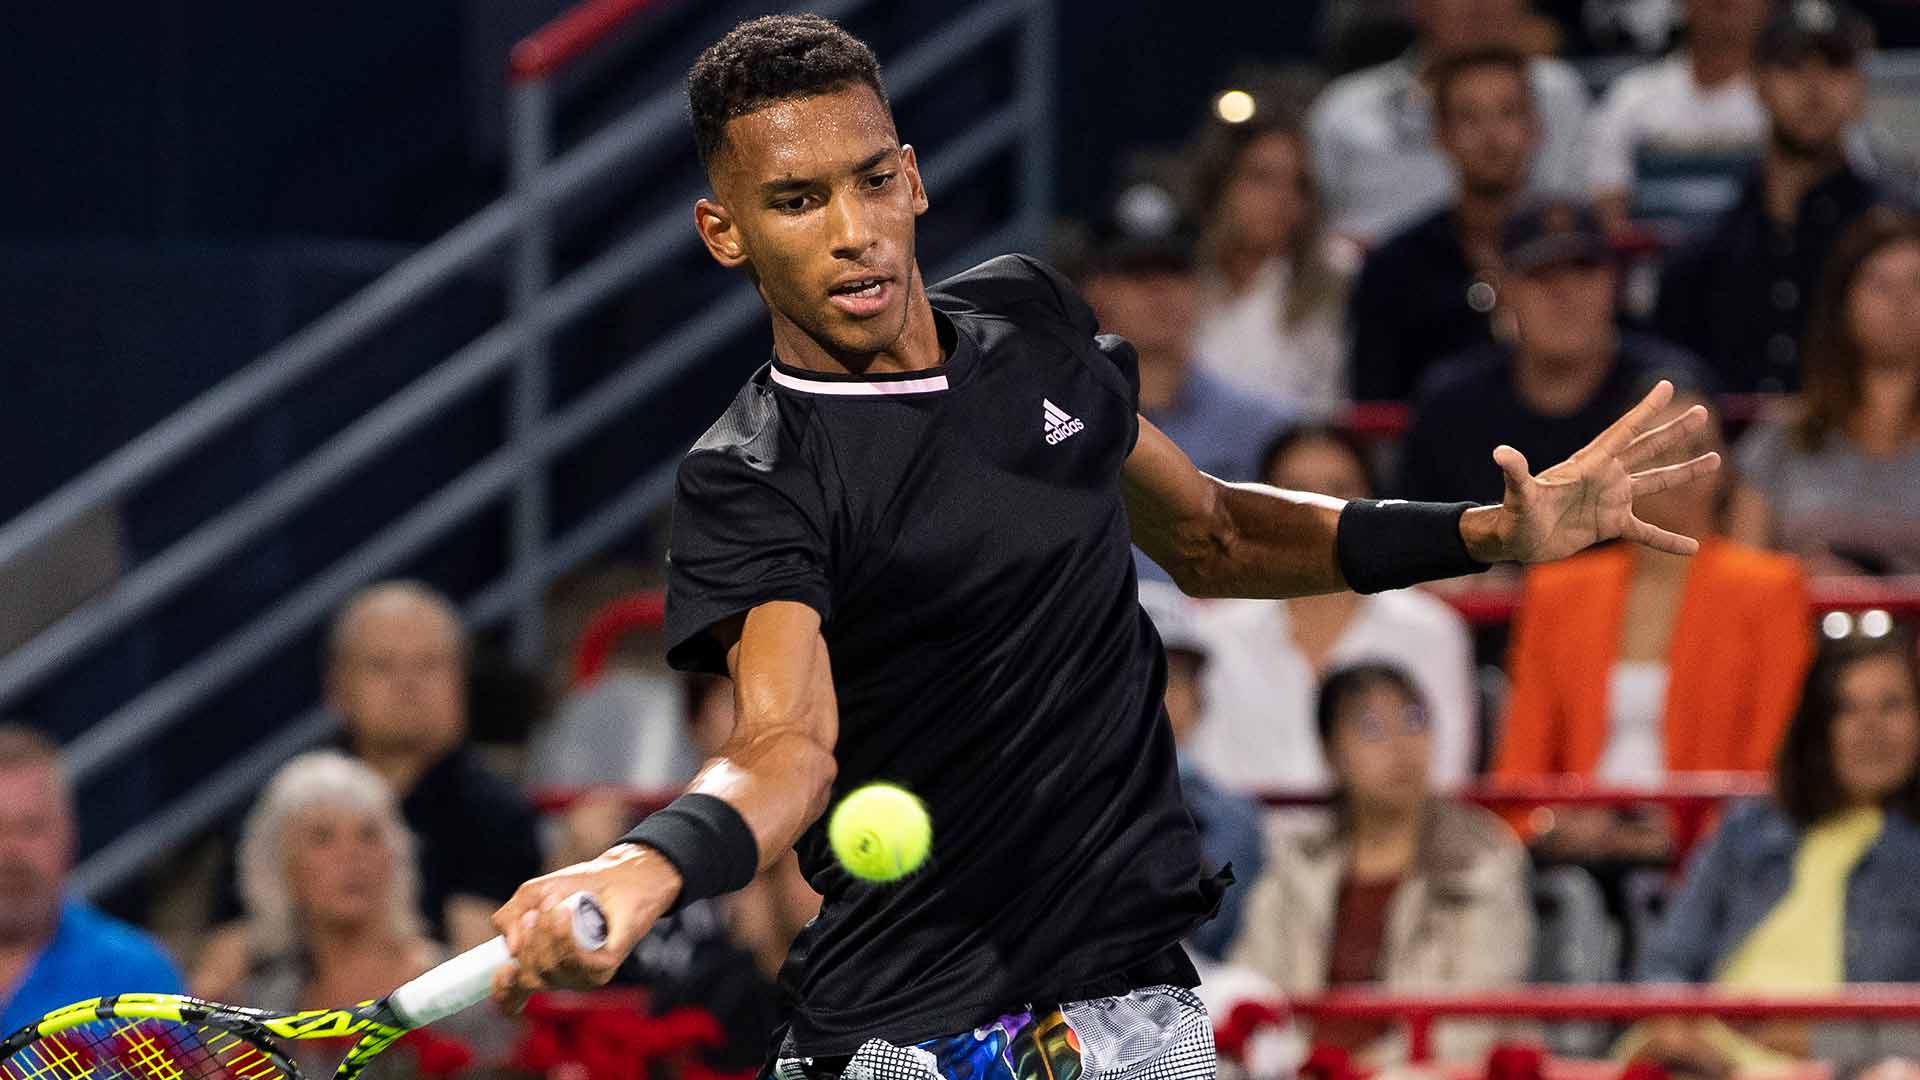 Felix Auger-Aliassime Takes On Cameron Norrie In Montreal: Preview | ATP Excursion